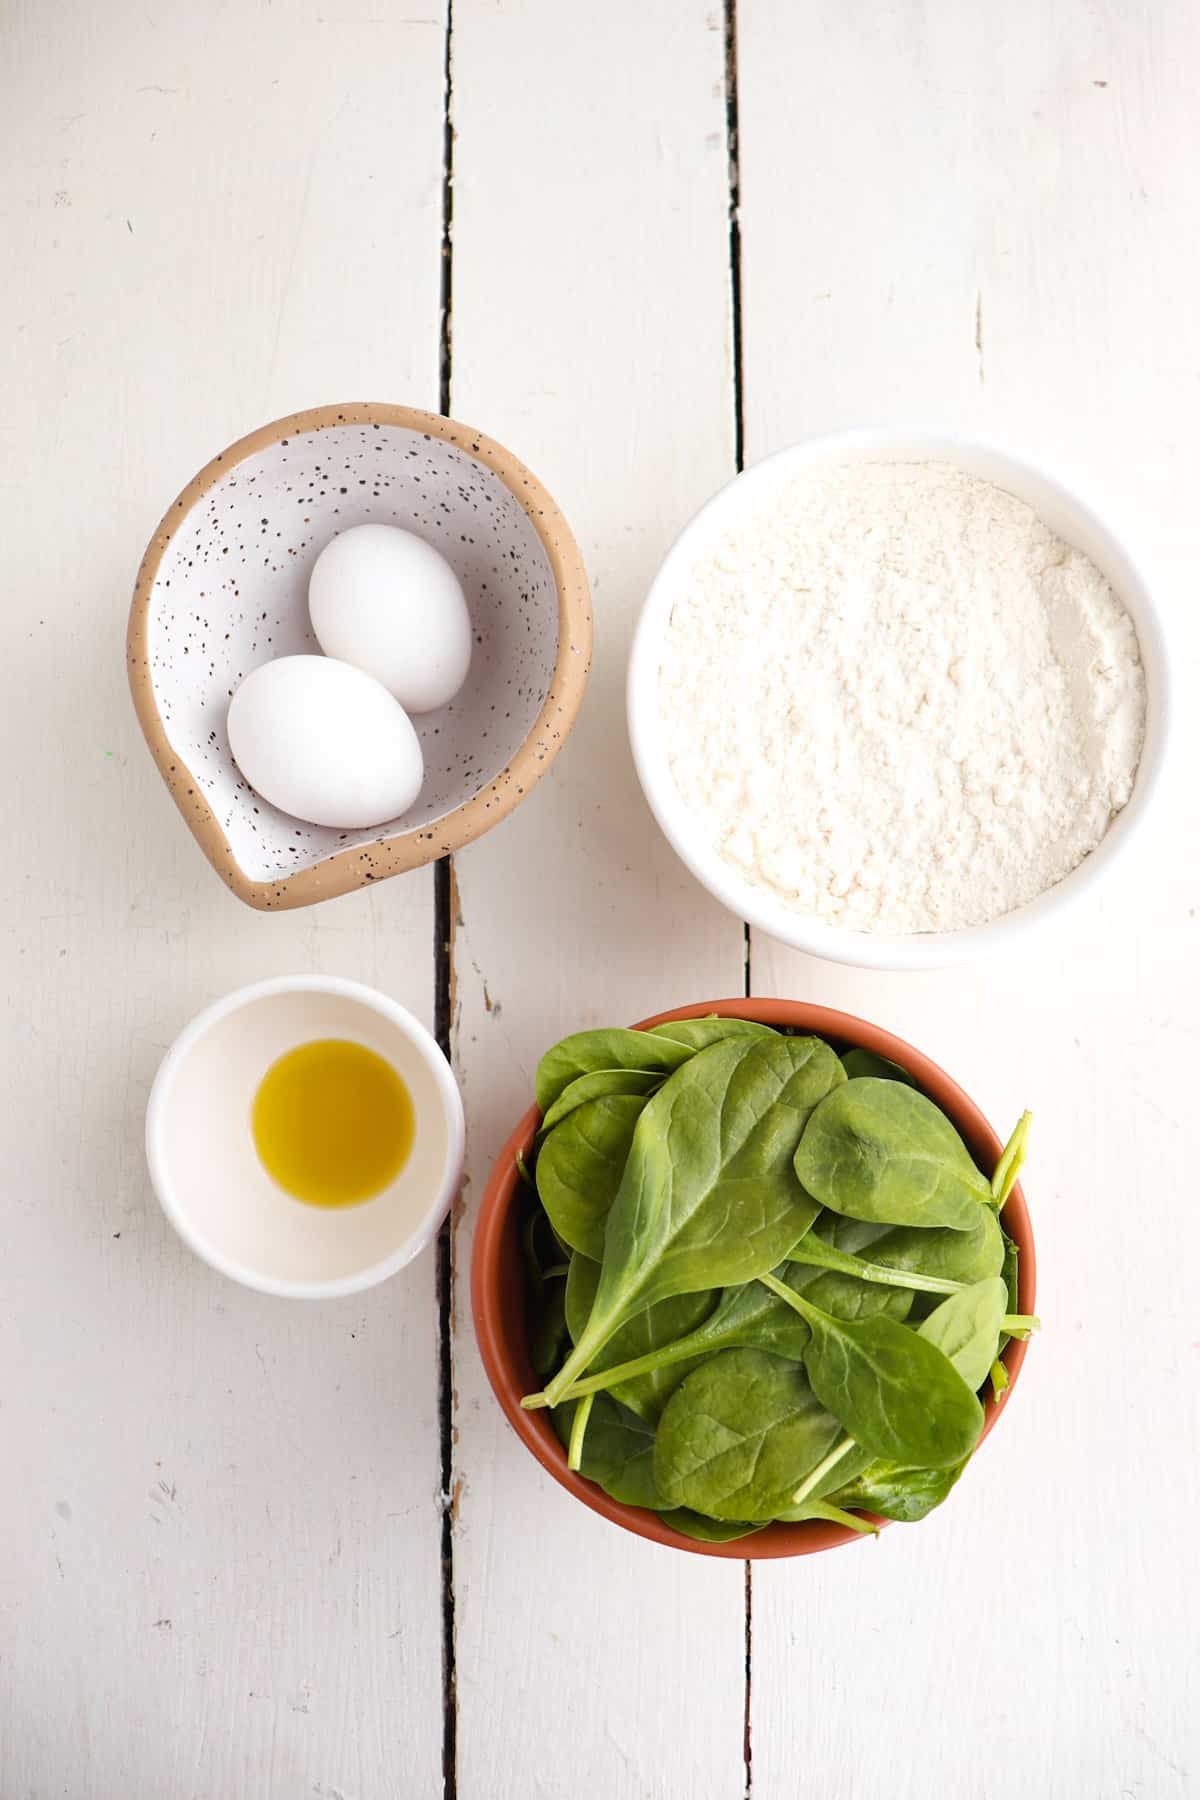 homemade spinach pasta dough ingredients on a white background.